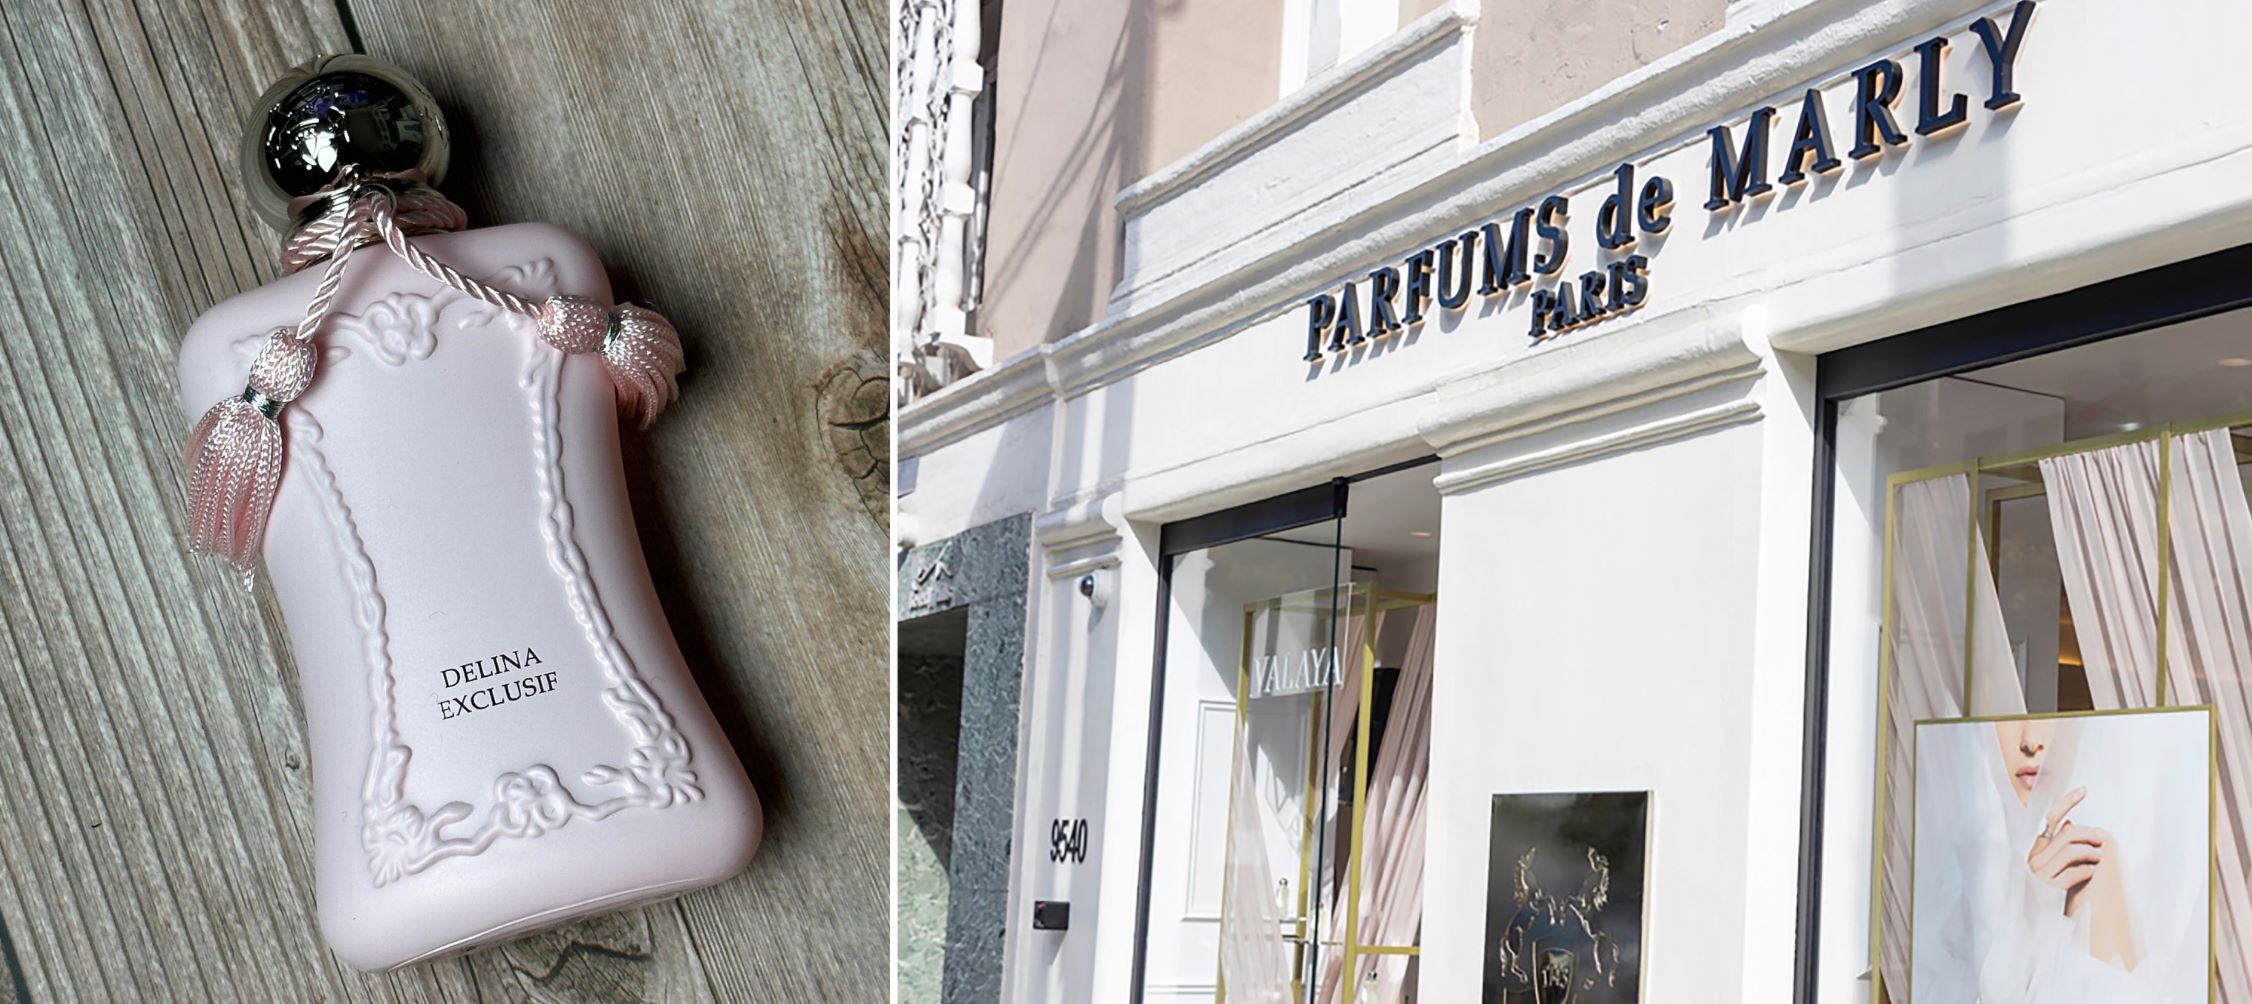 An image of one of my favorite Mother's Day gifts: in the left is a bottle of he popular Delina Exclusif perfume from the left image of the store, Parfums de Marly.